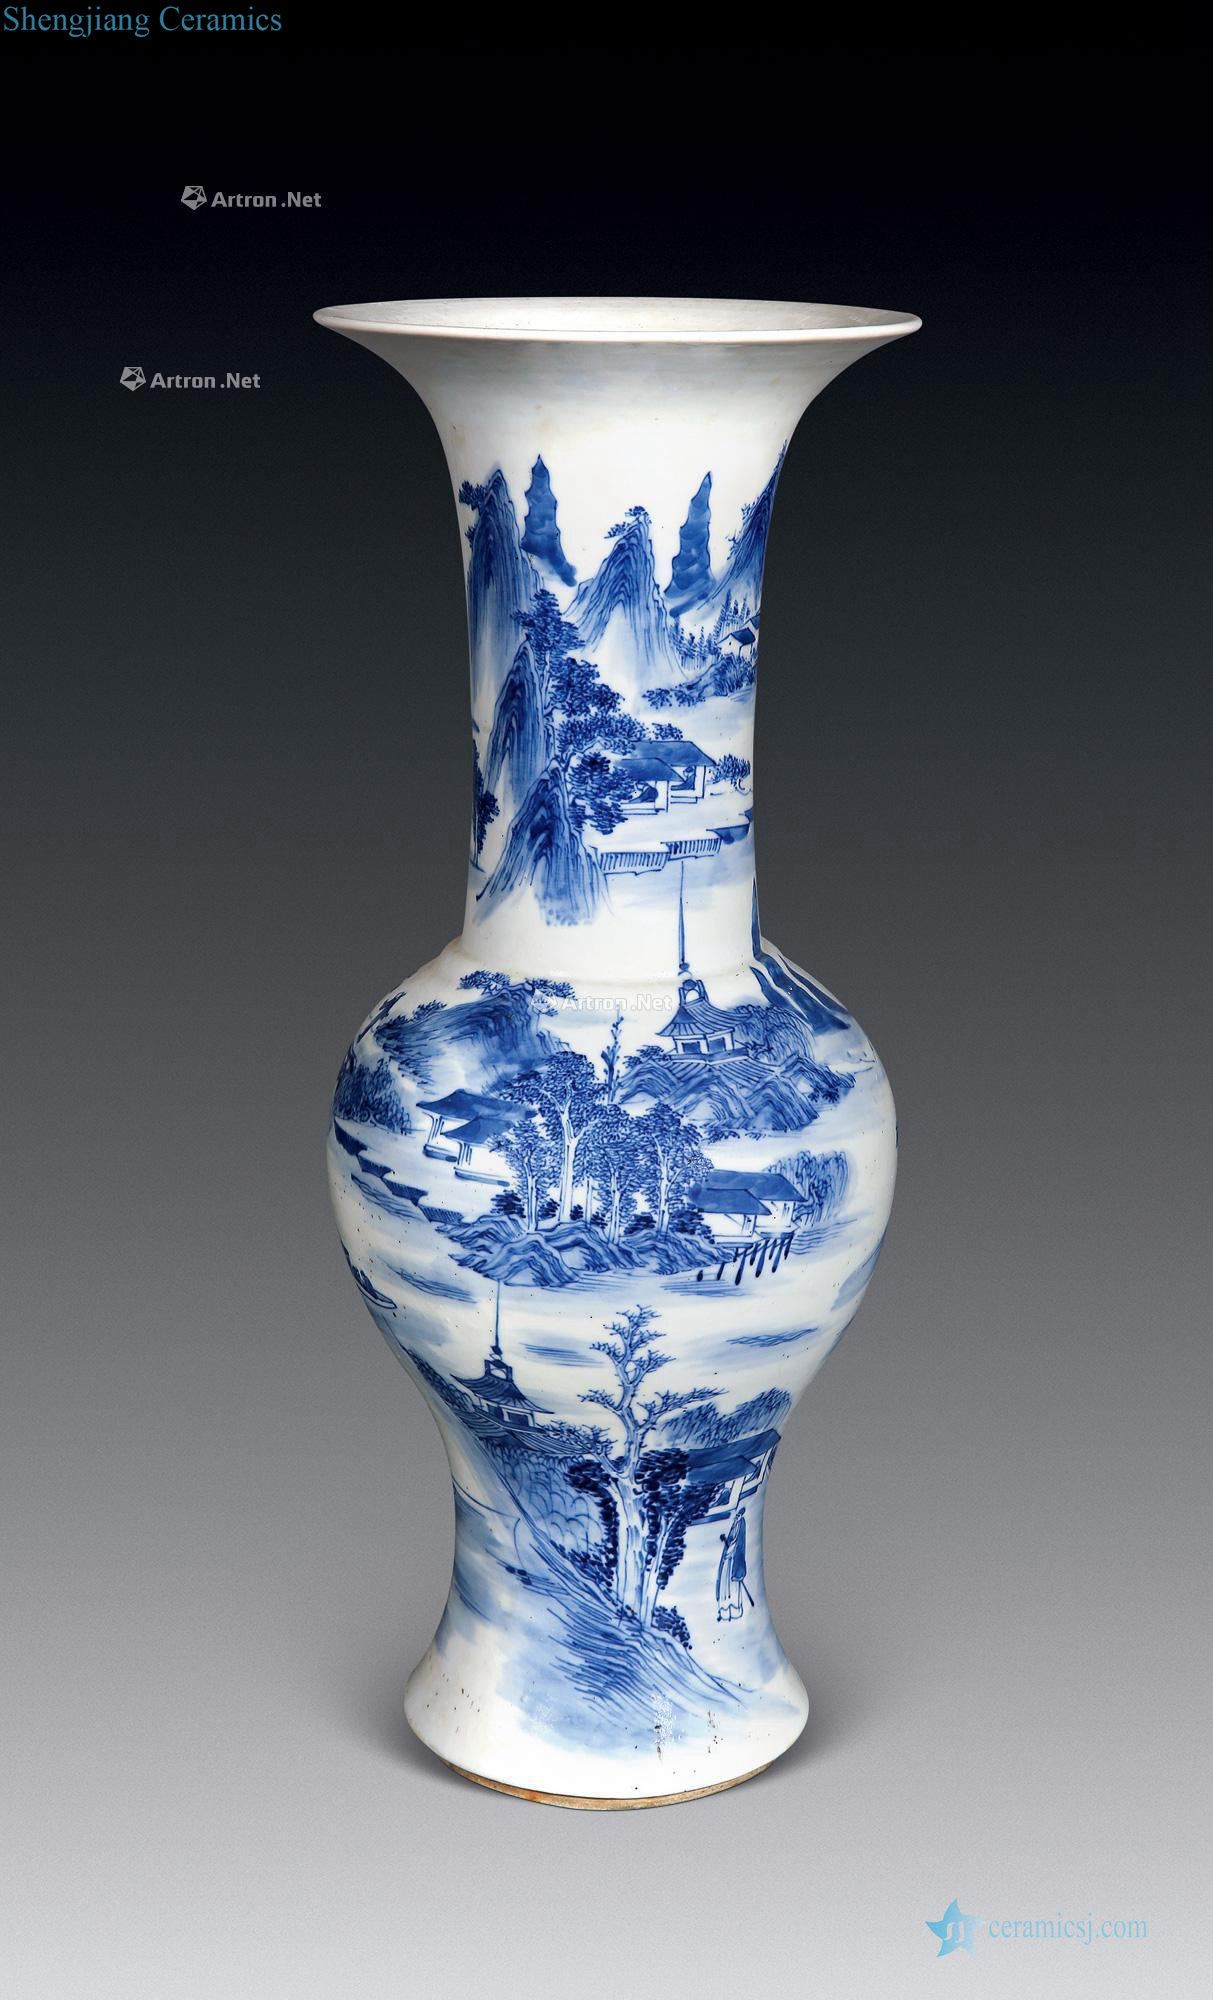 In the qing dynasty Blue and white flower vase with landscapes